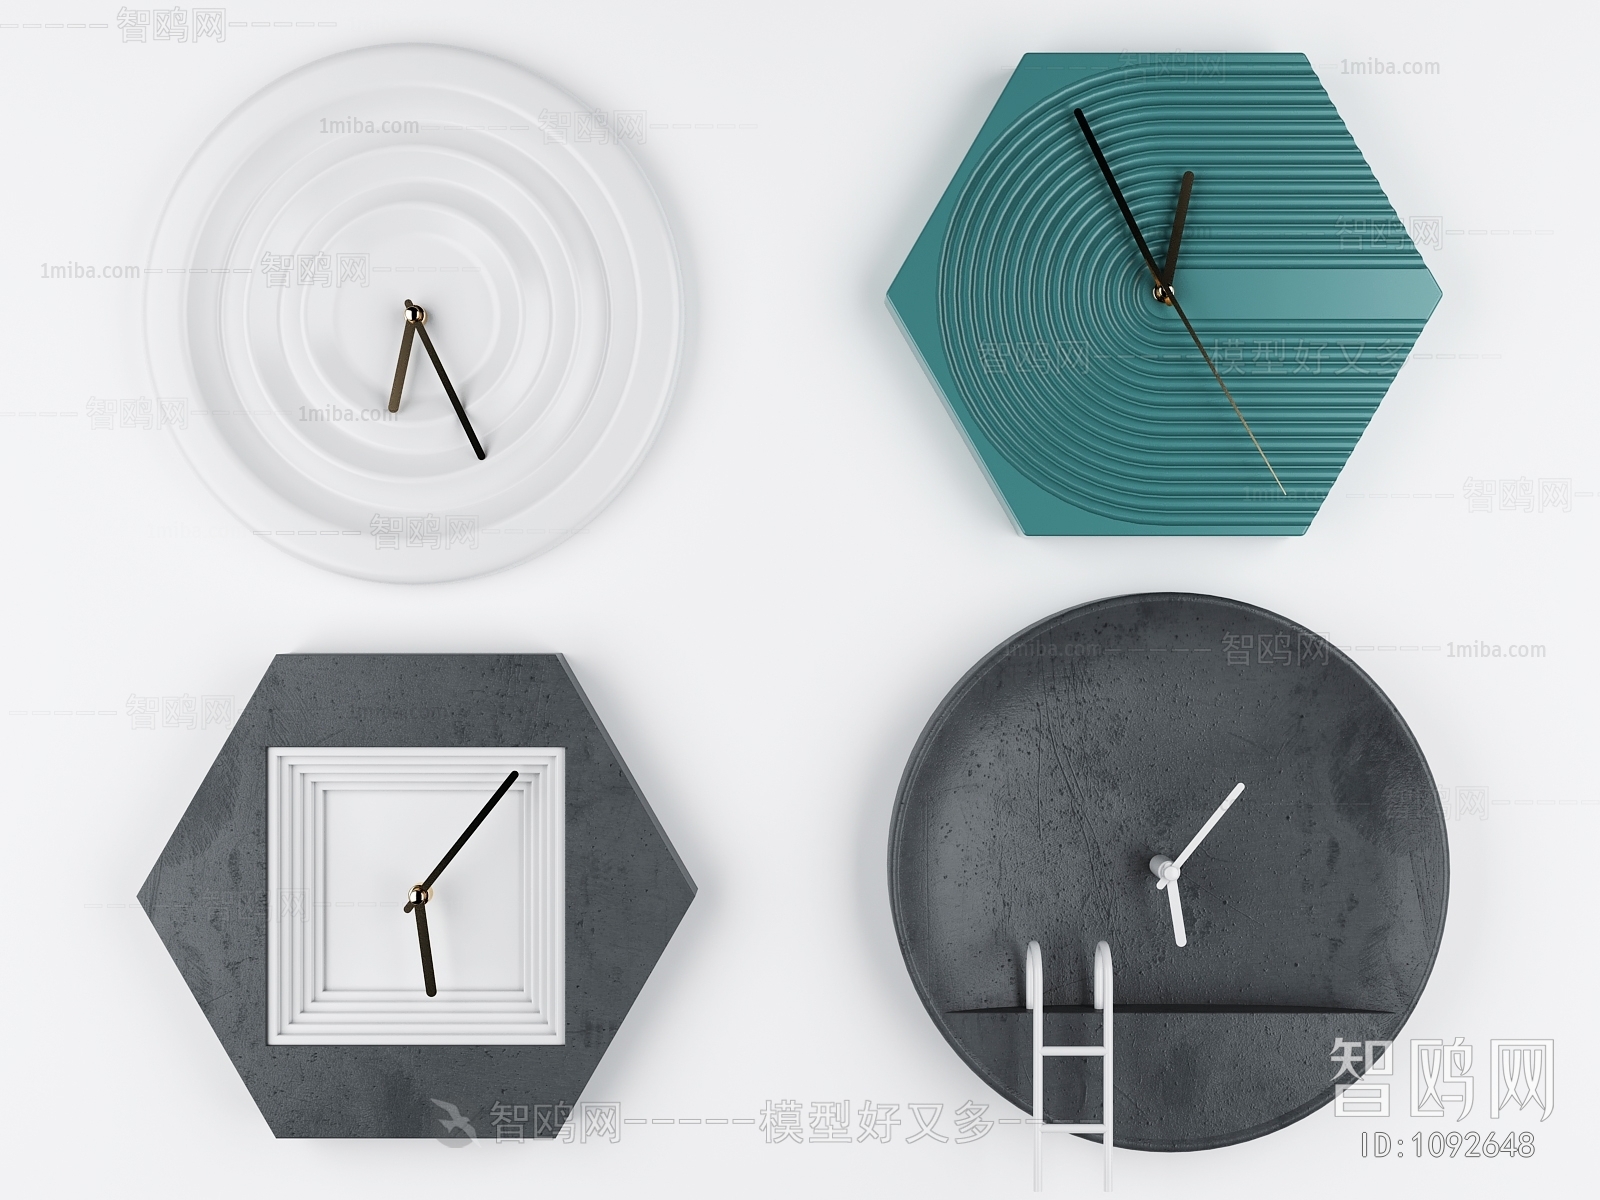 Nordic Style Wall Clock